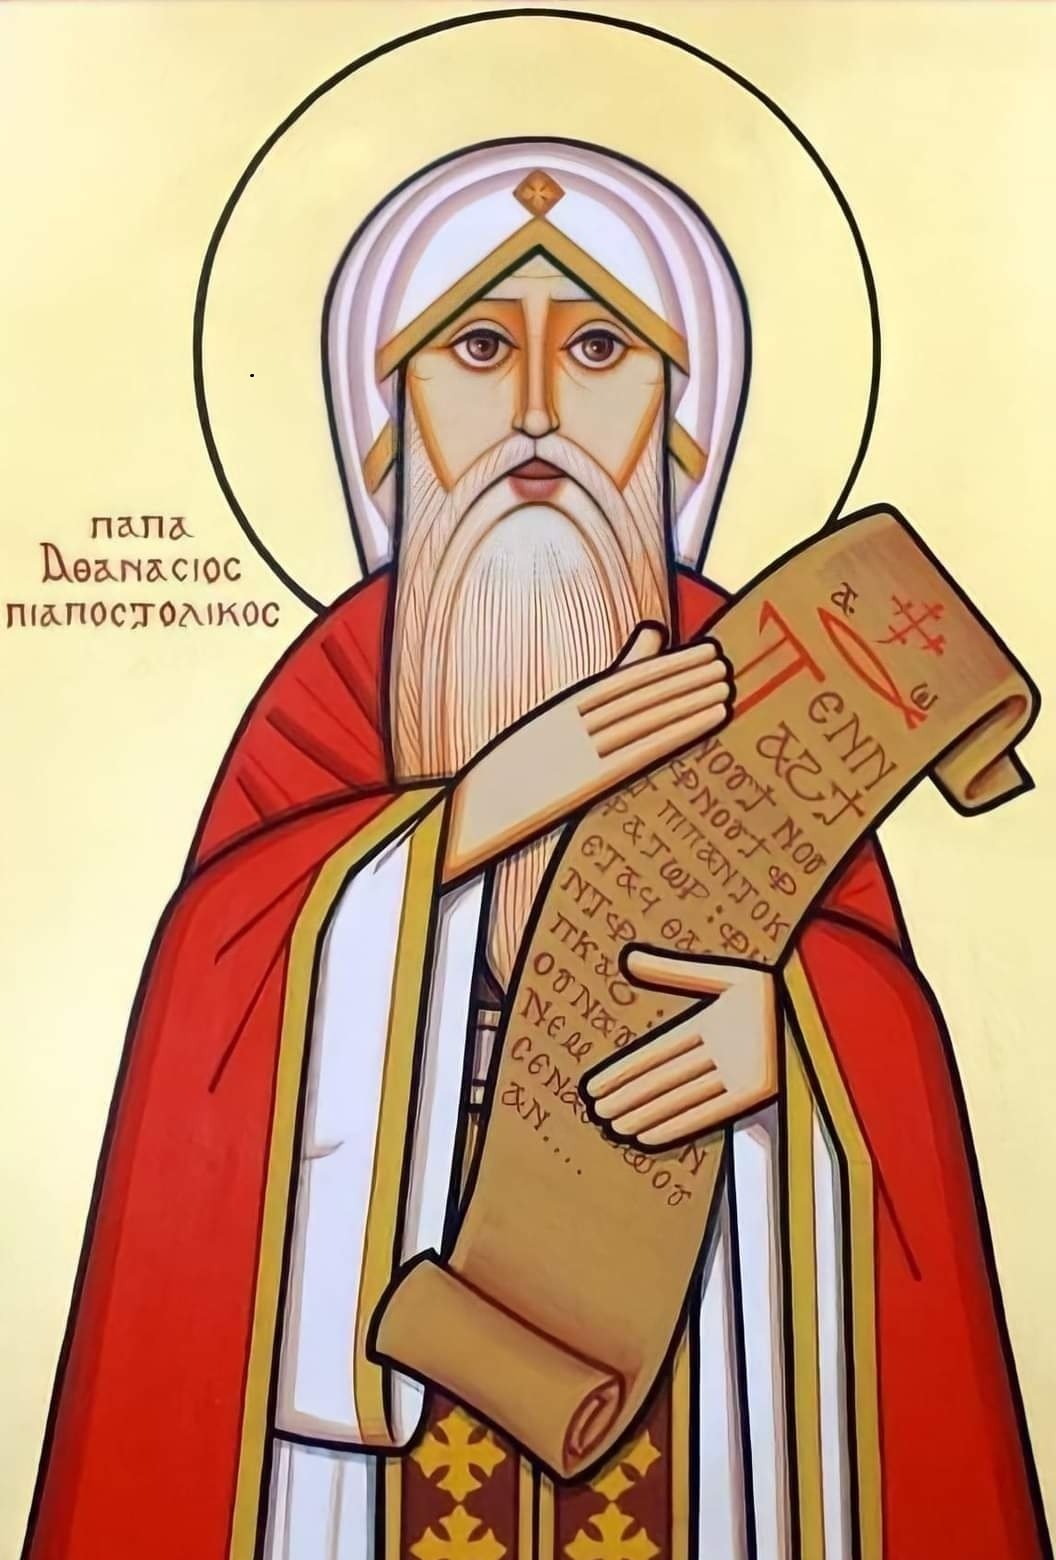 St. Athanasius The Defender of Faith